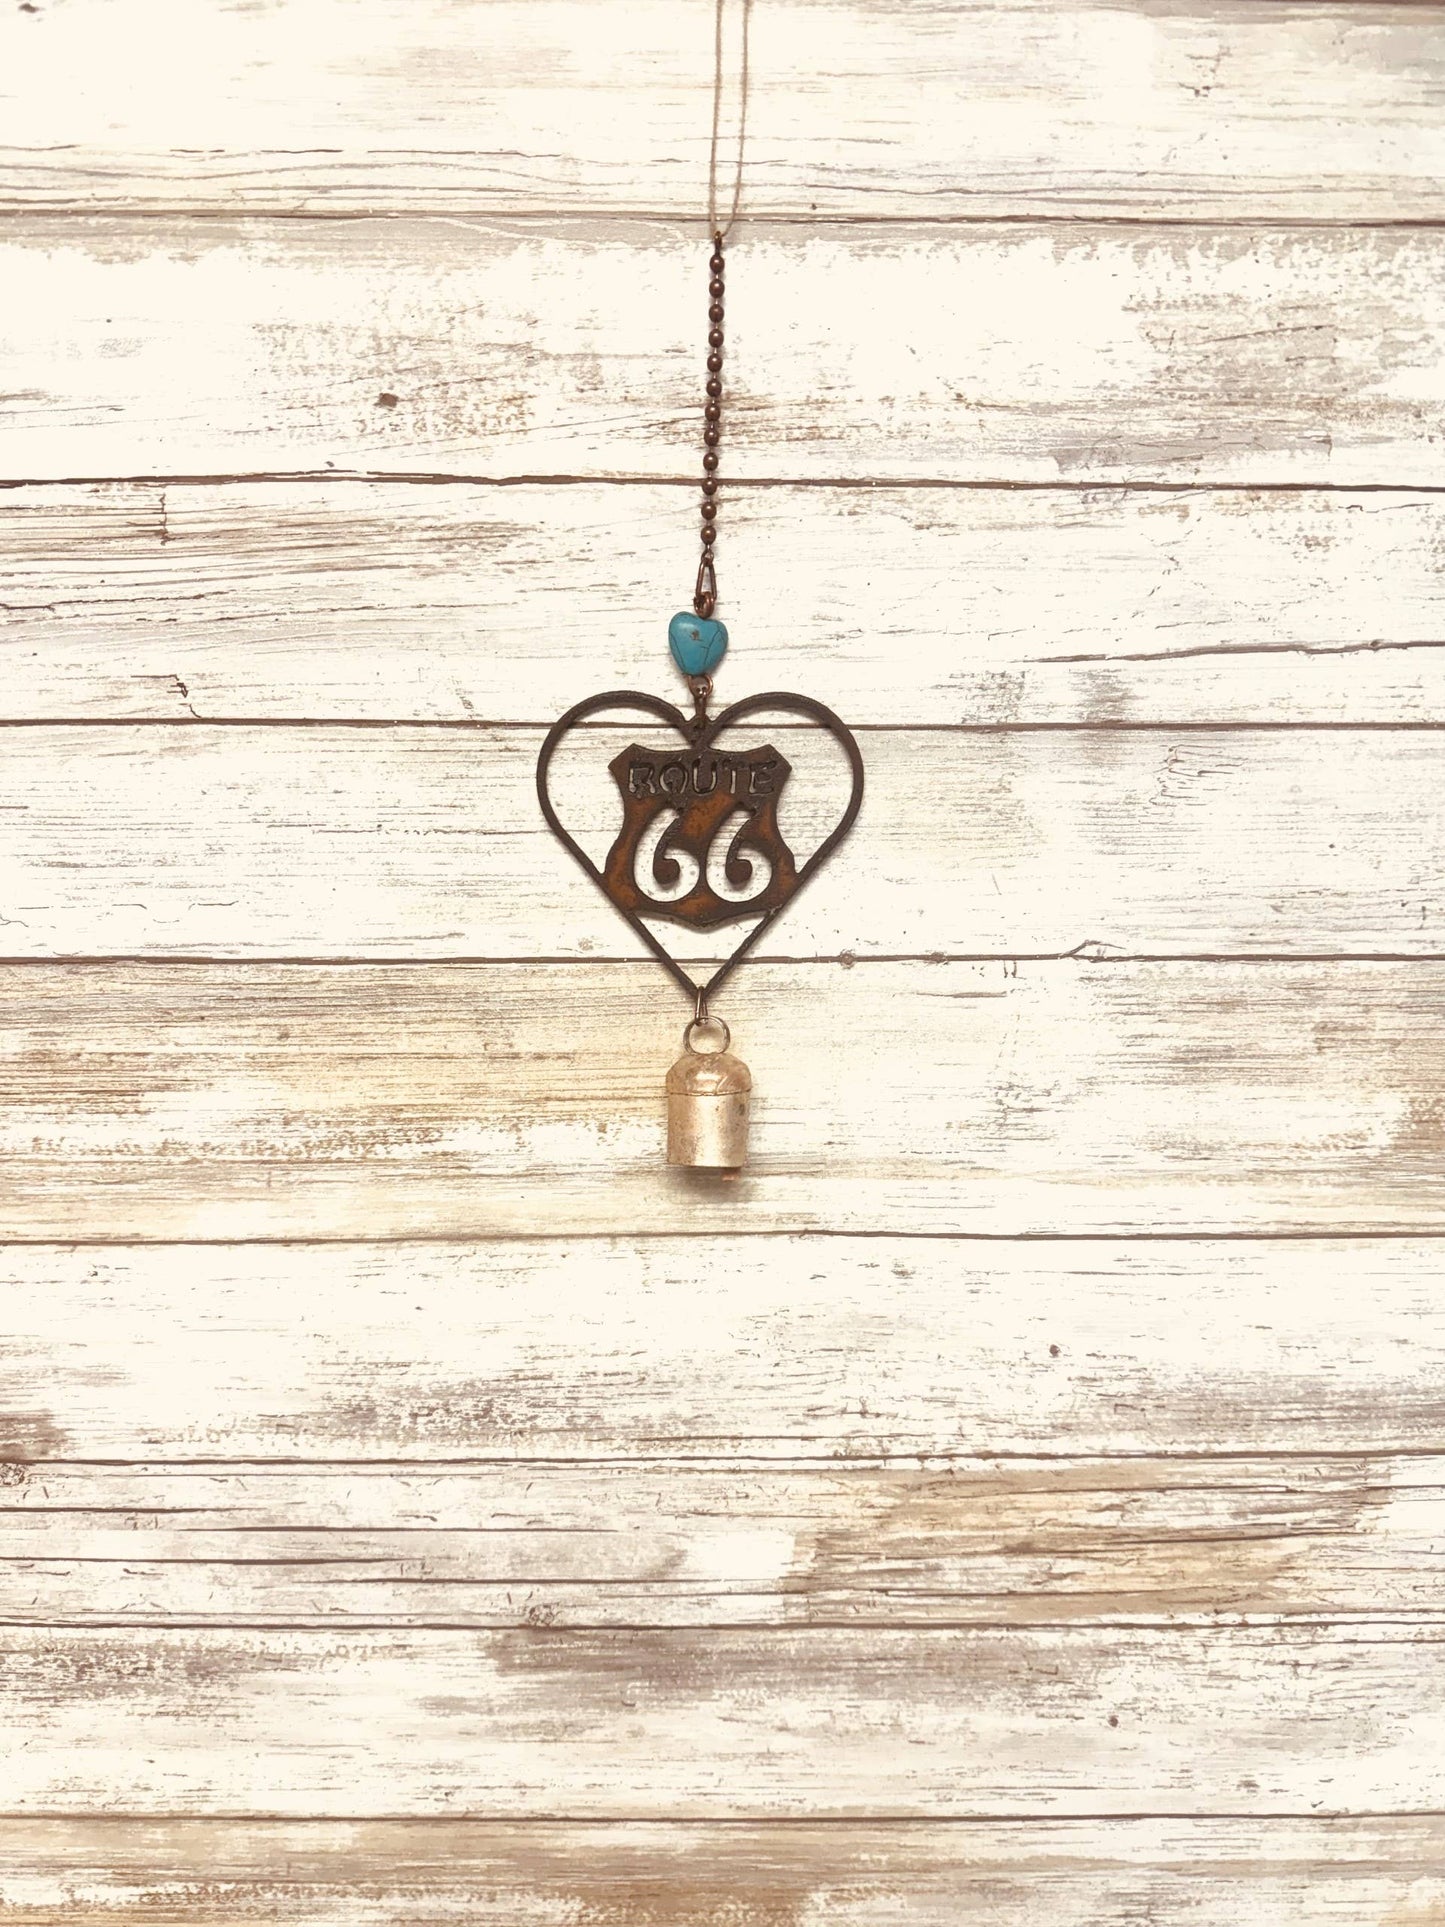 Heart Outline with Route 66 Rustic Metal Garden Bell Chime